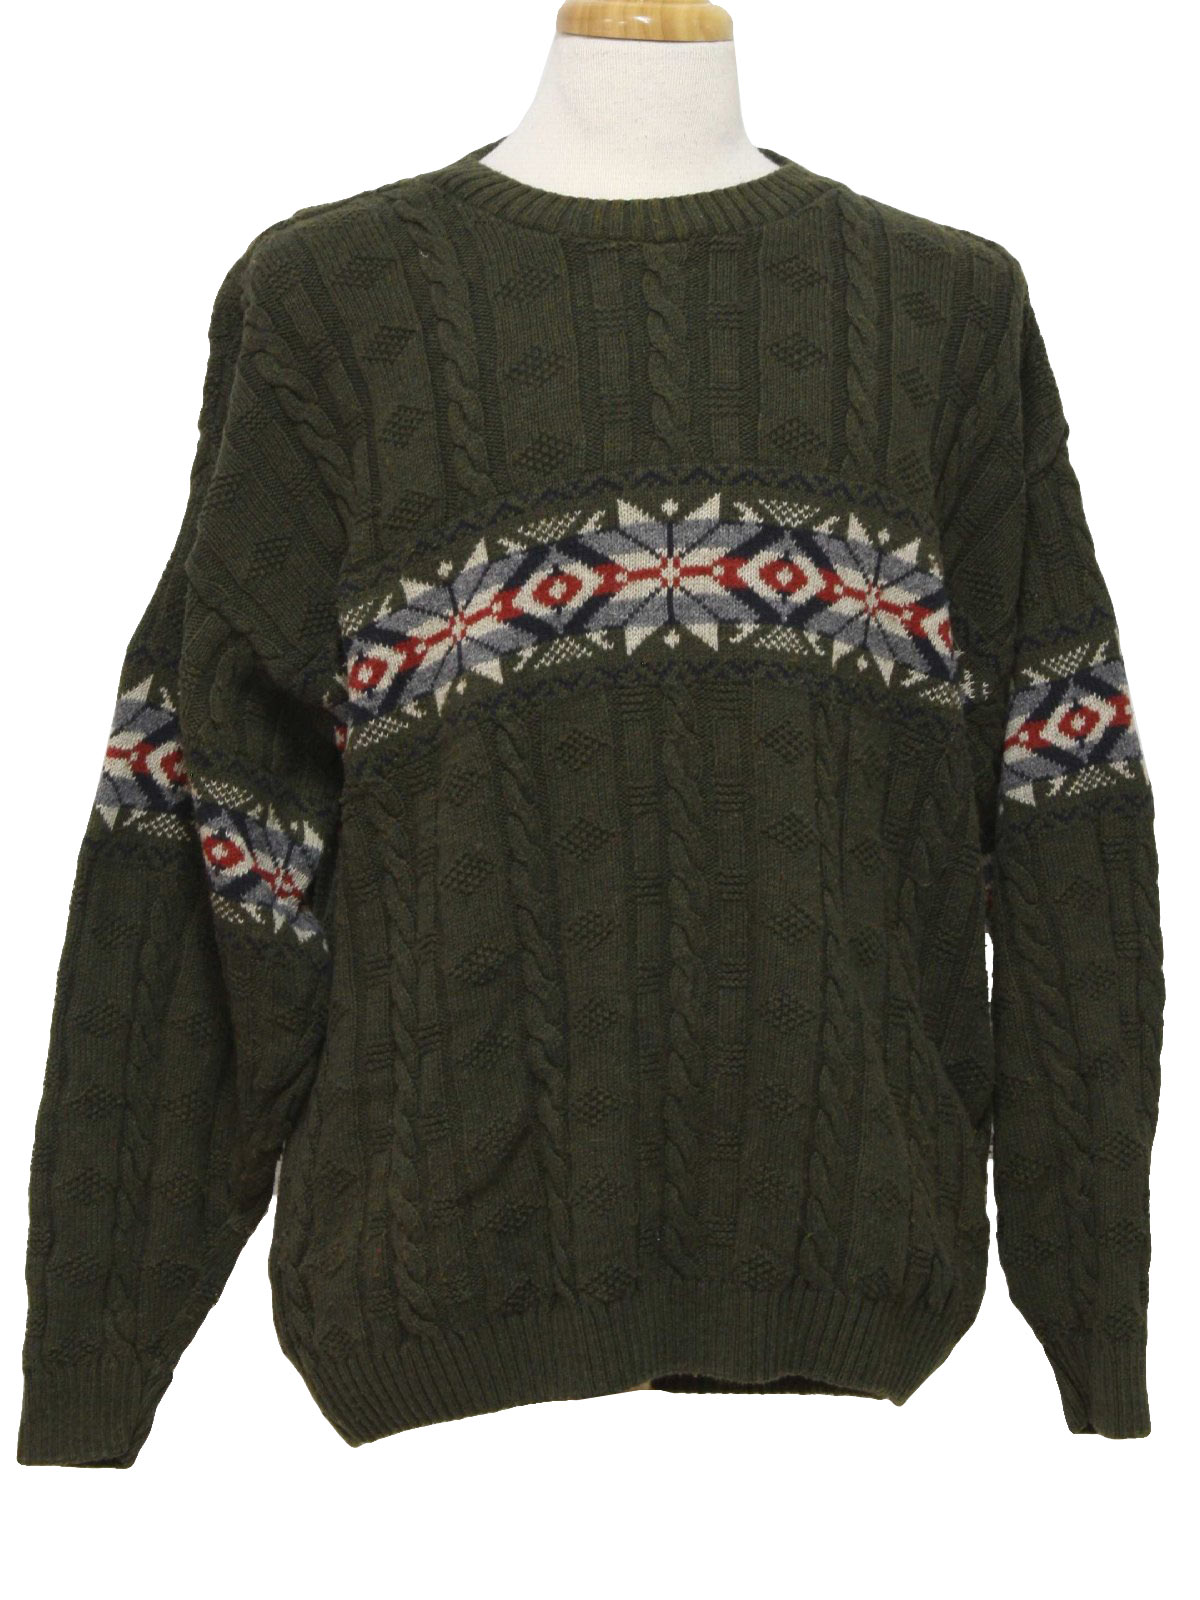 Vintage 90s Sweater: 90s -Liberty Sweaters- Mens deep forest green